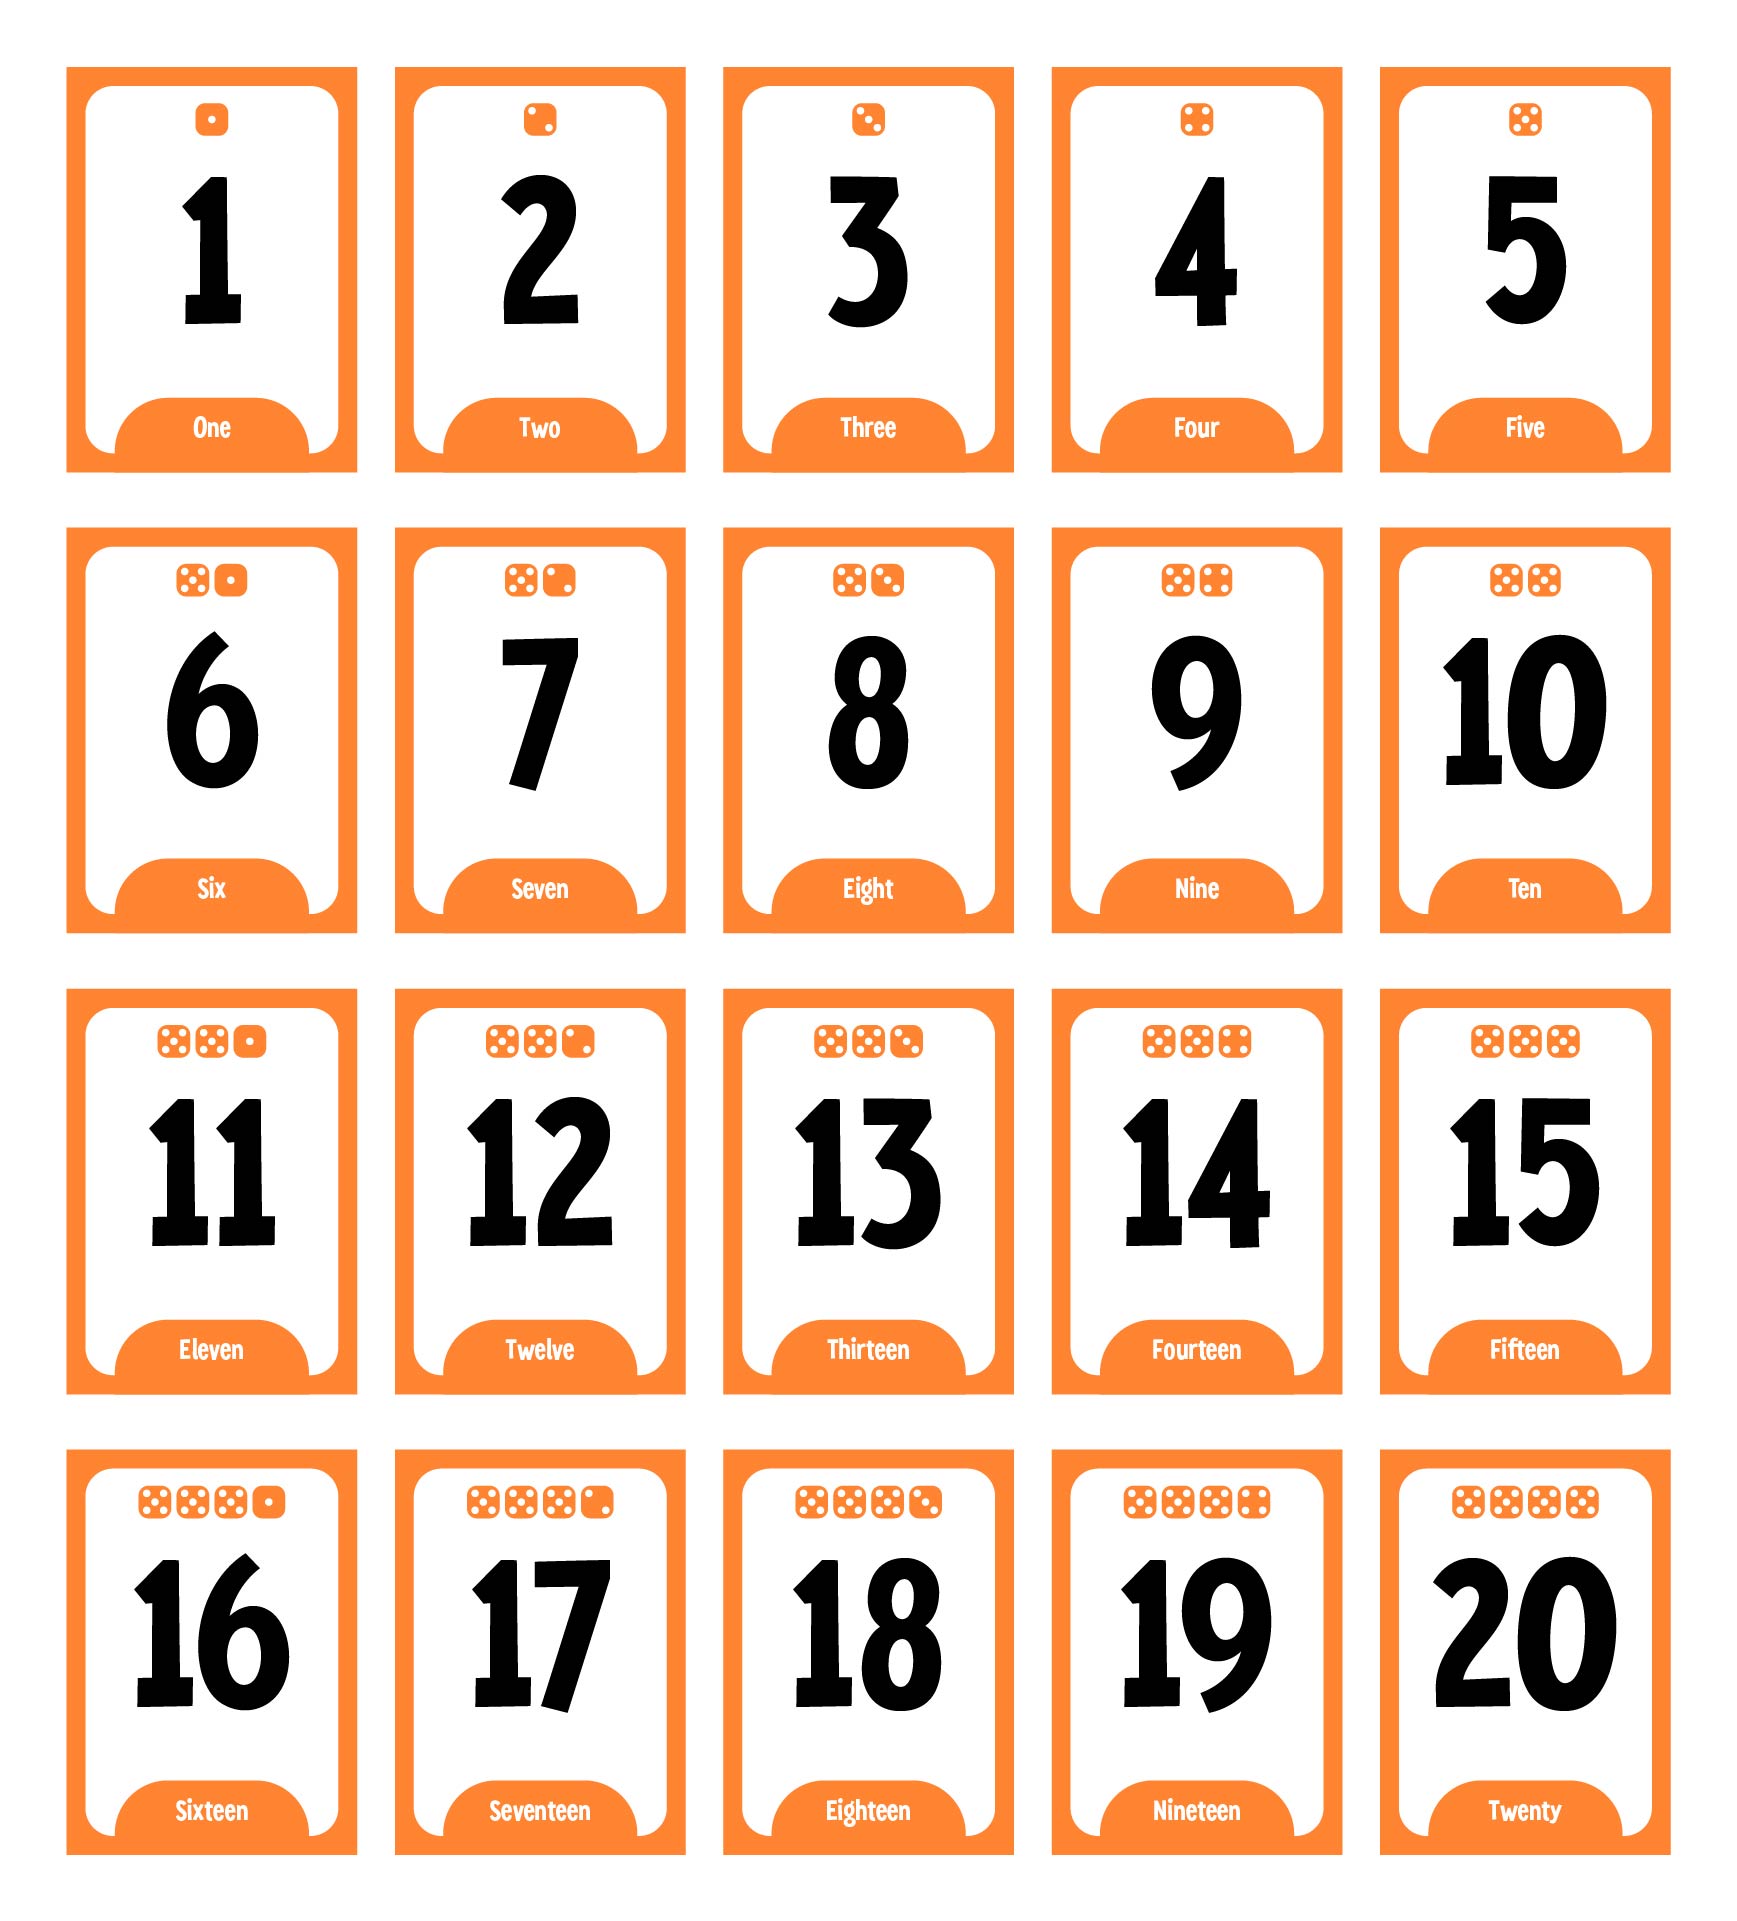 4-best-images-of-large-printable-number-cards-1-20-printable-number